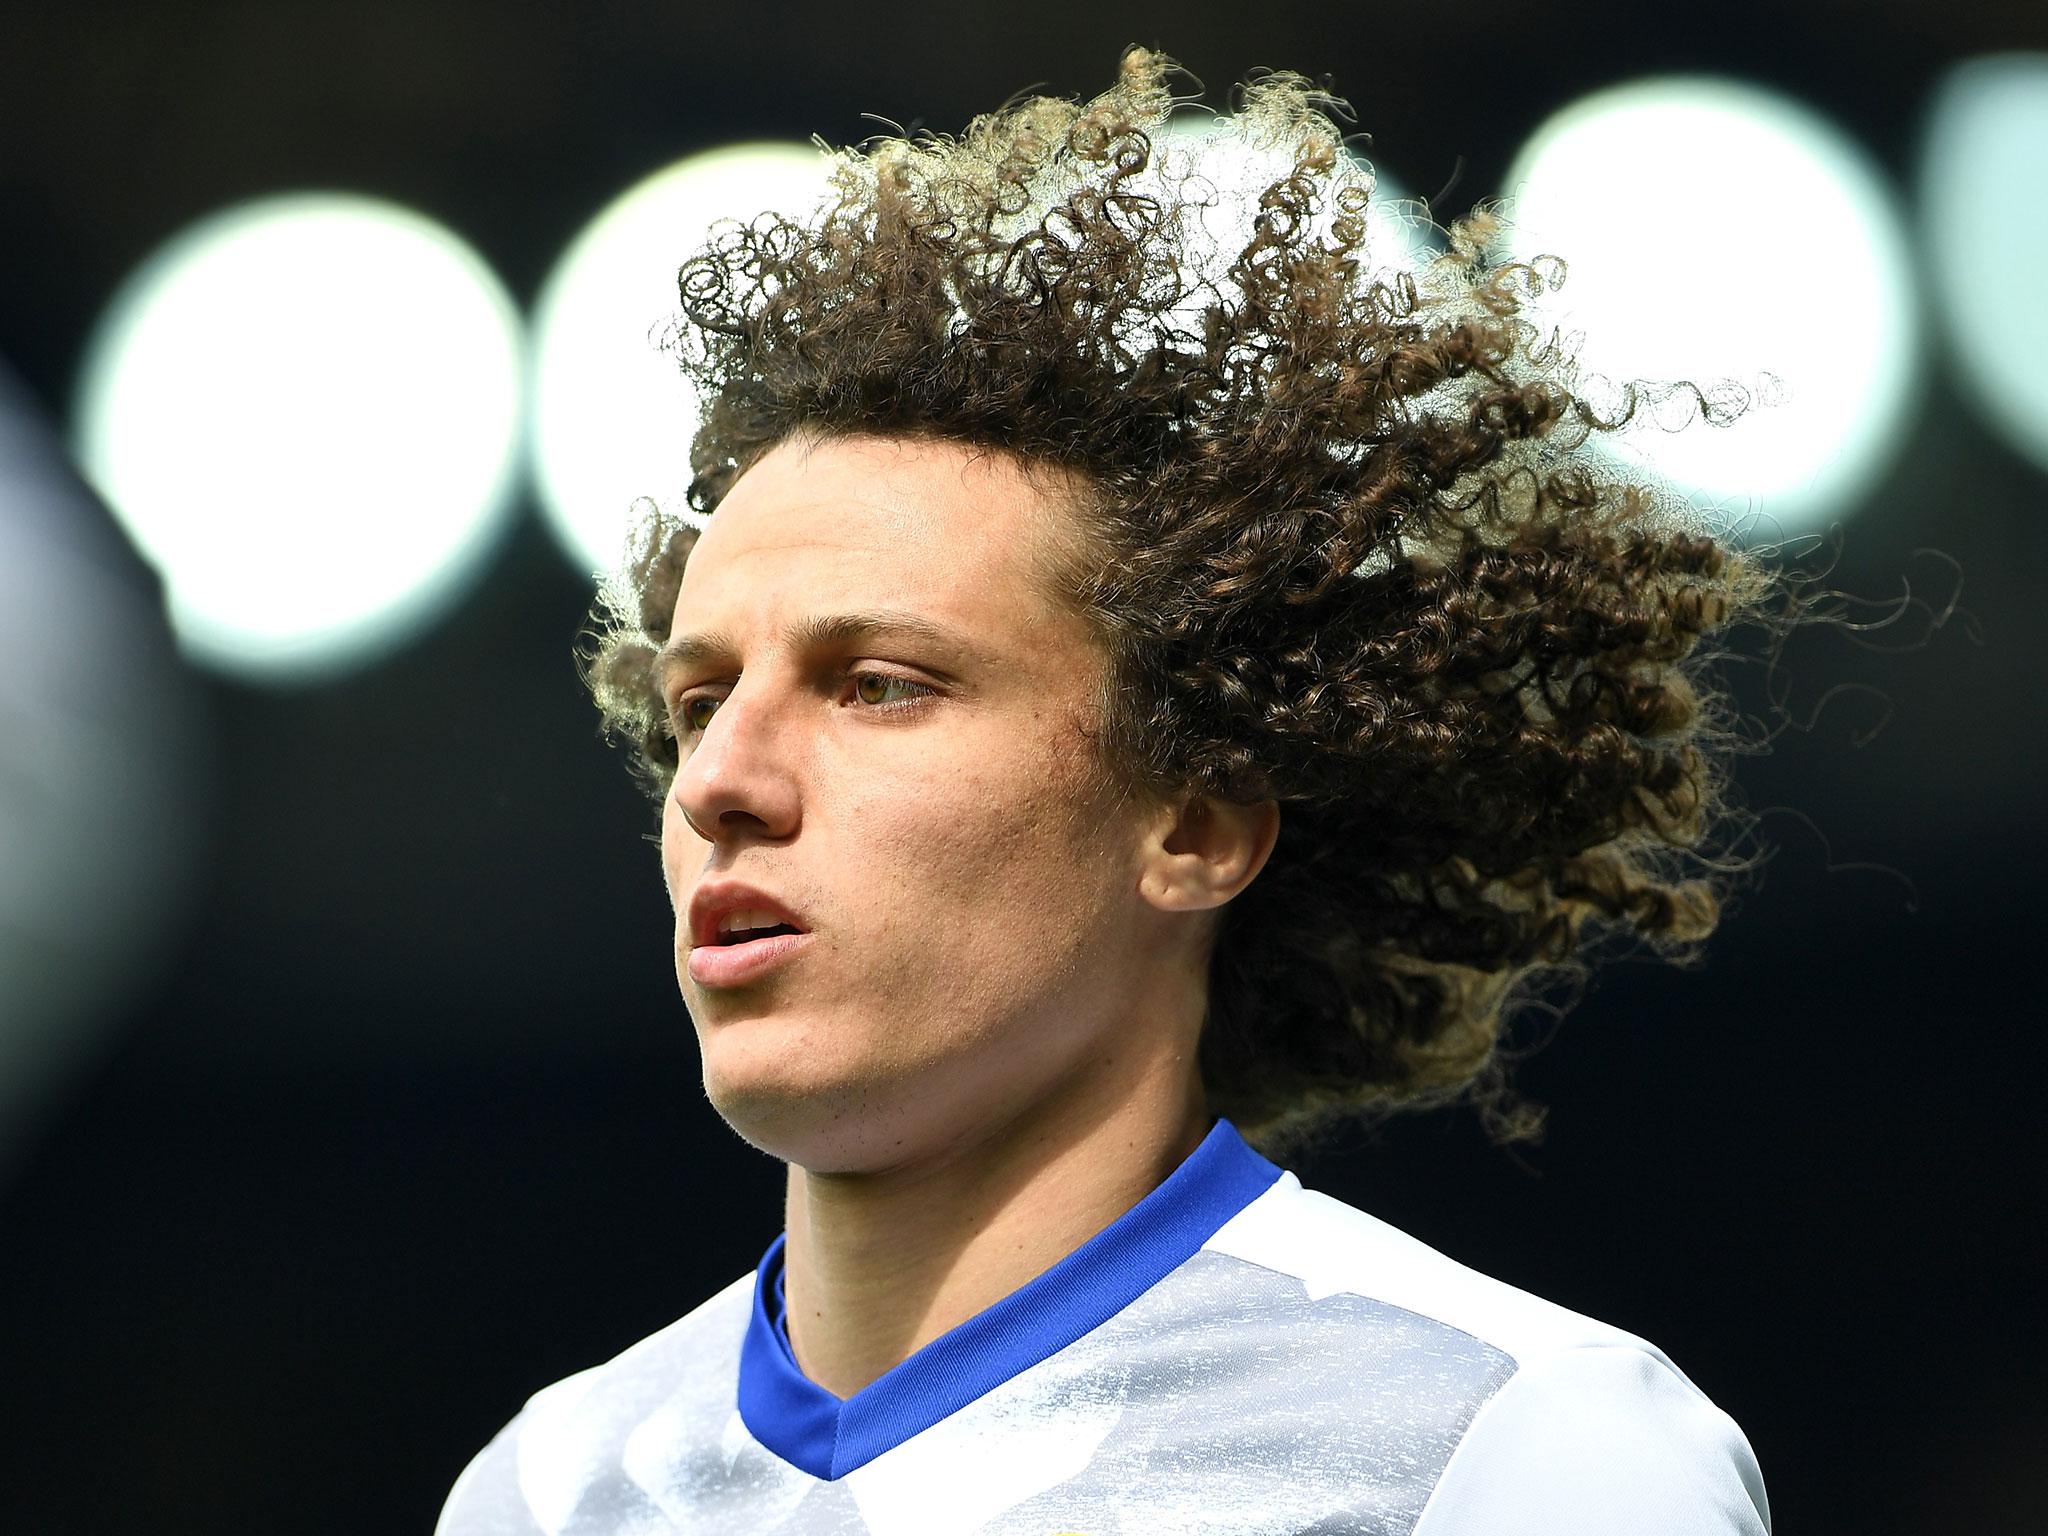 Arsenal defender David Luiz reveals hed get rid of curly locks if he made  move into management  Daily Mail Online